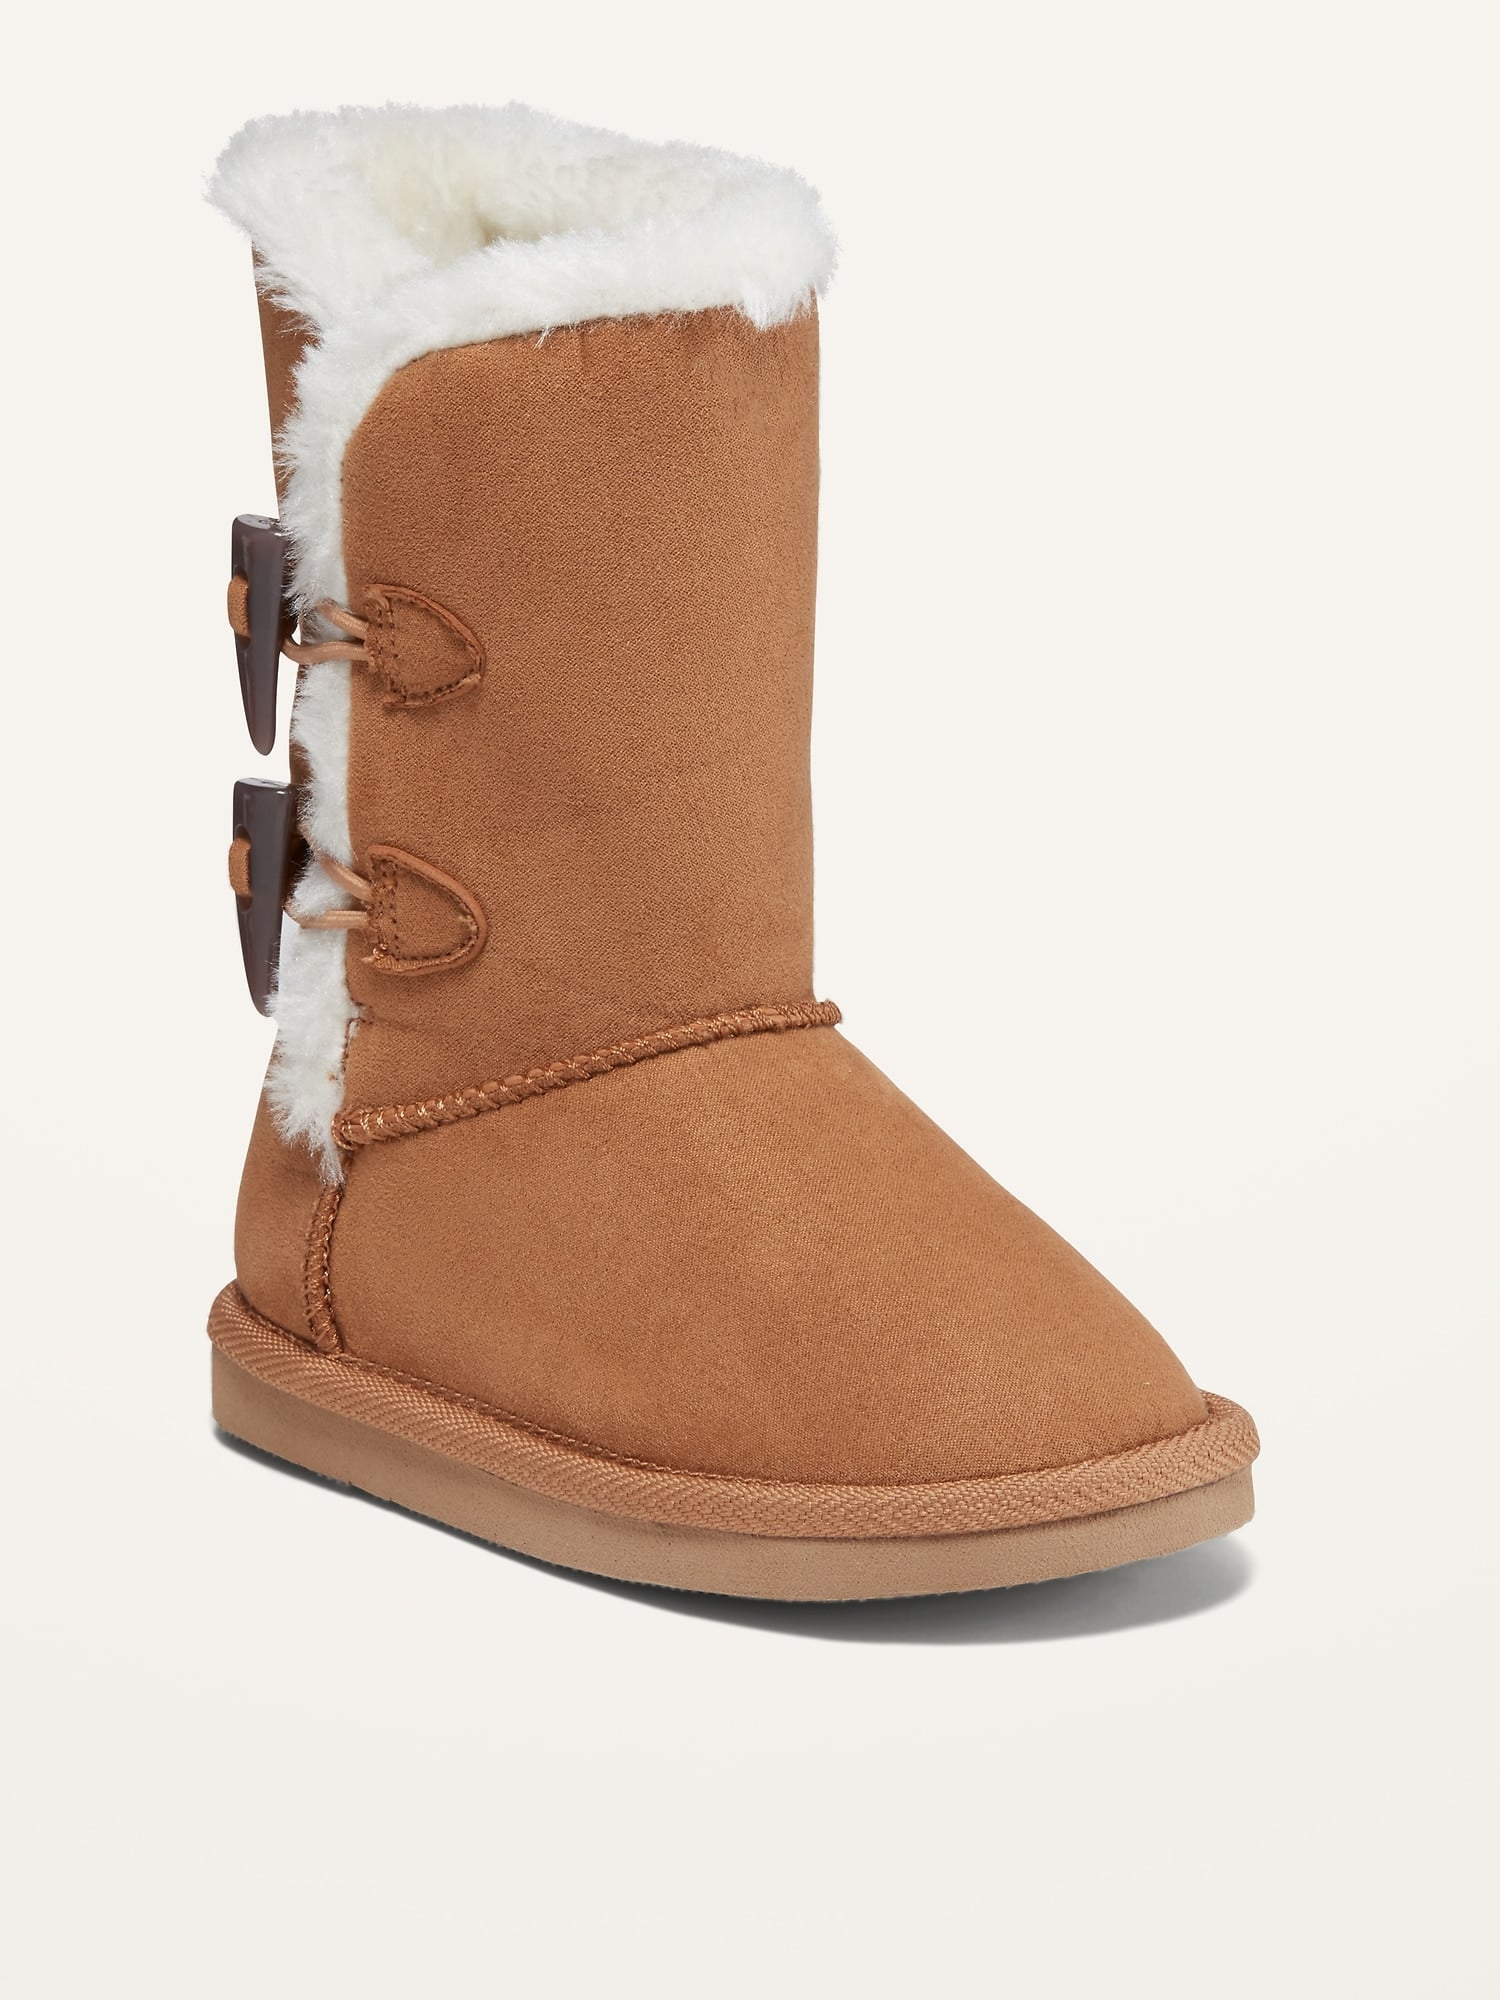 Faux-Fur-Lined Boots for Toddler Girls 